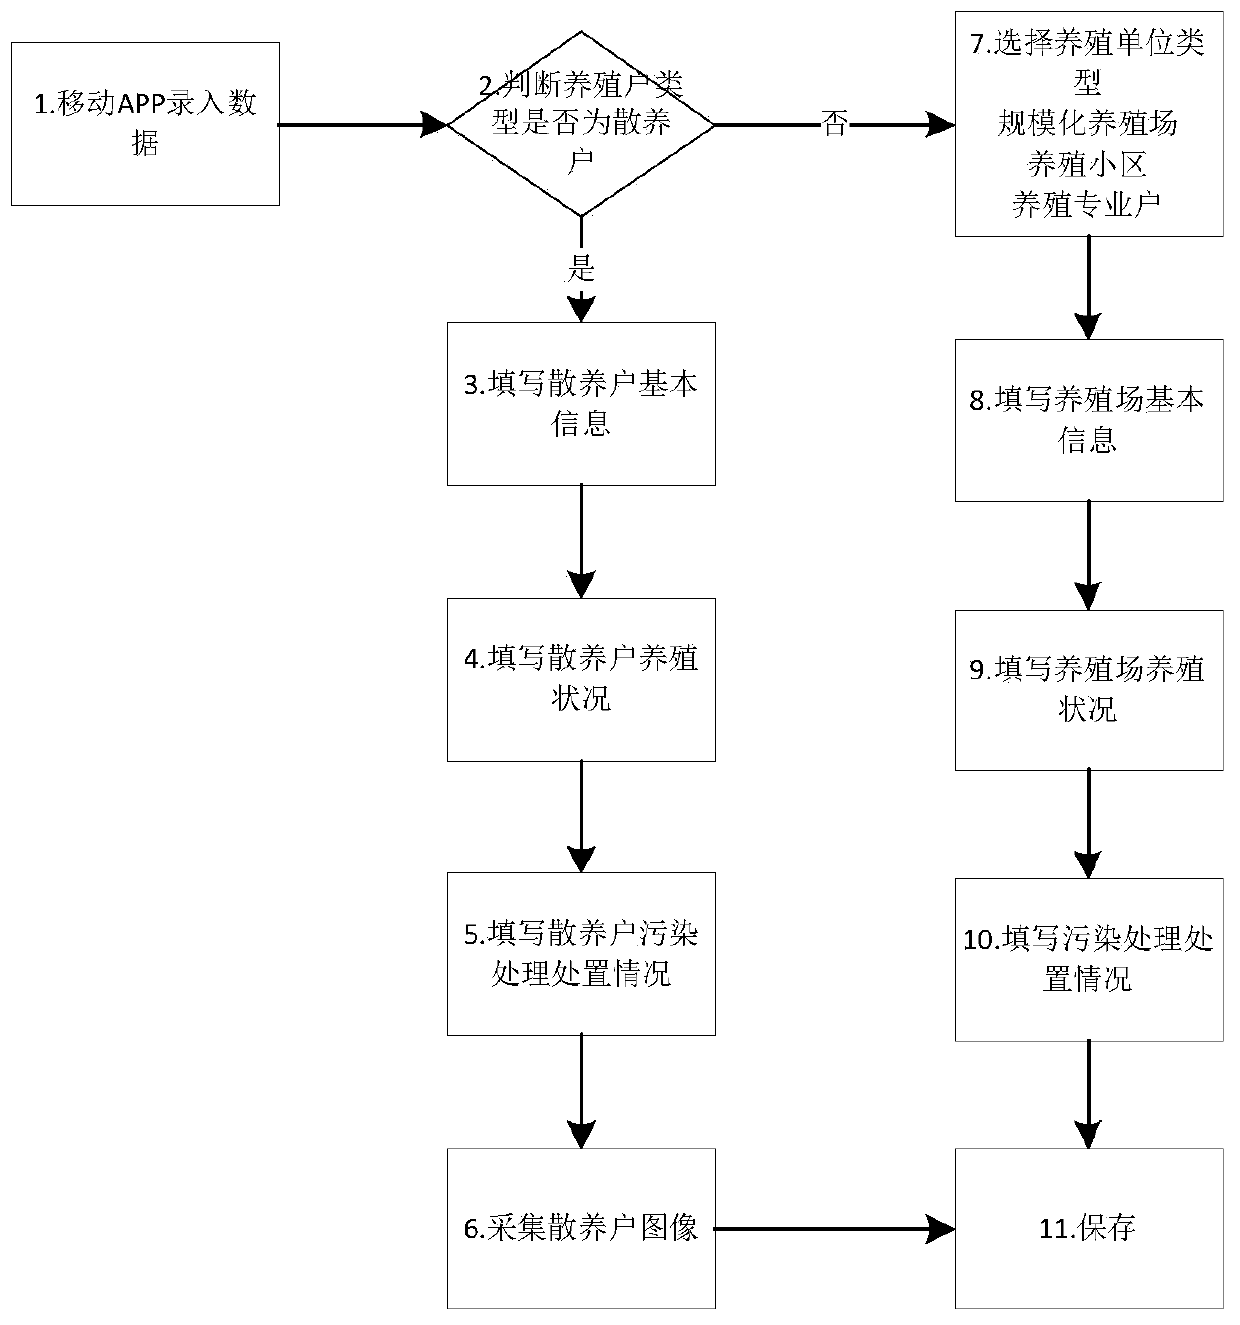 Livestock and poultry breeding pollution prevention and control supervision and management system and method